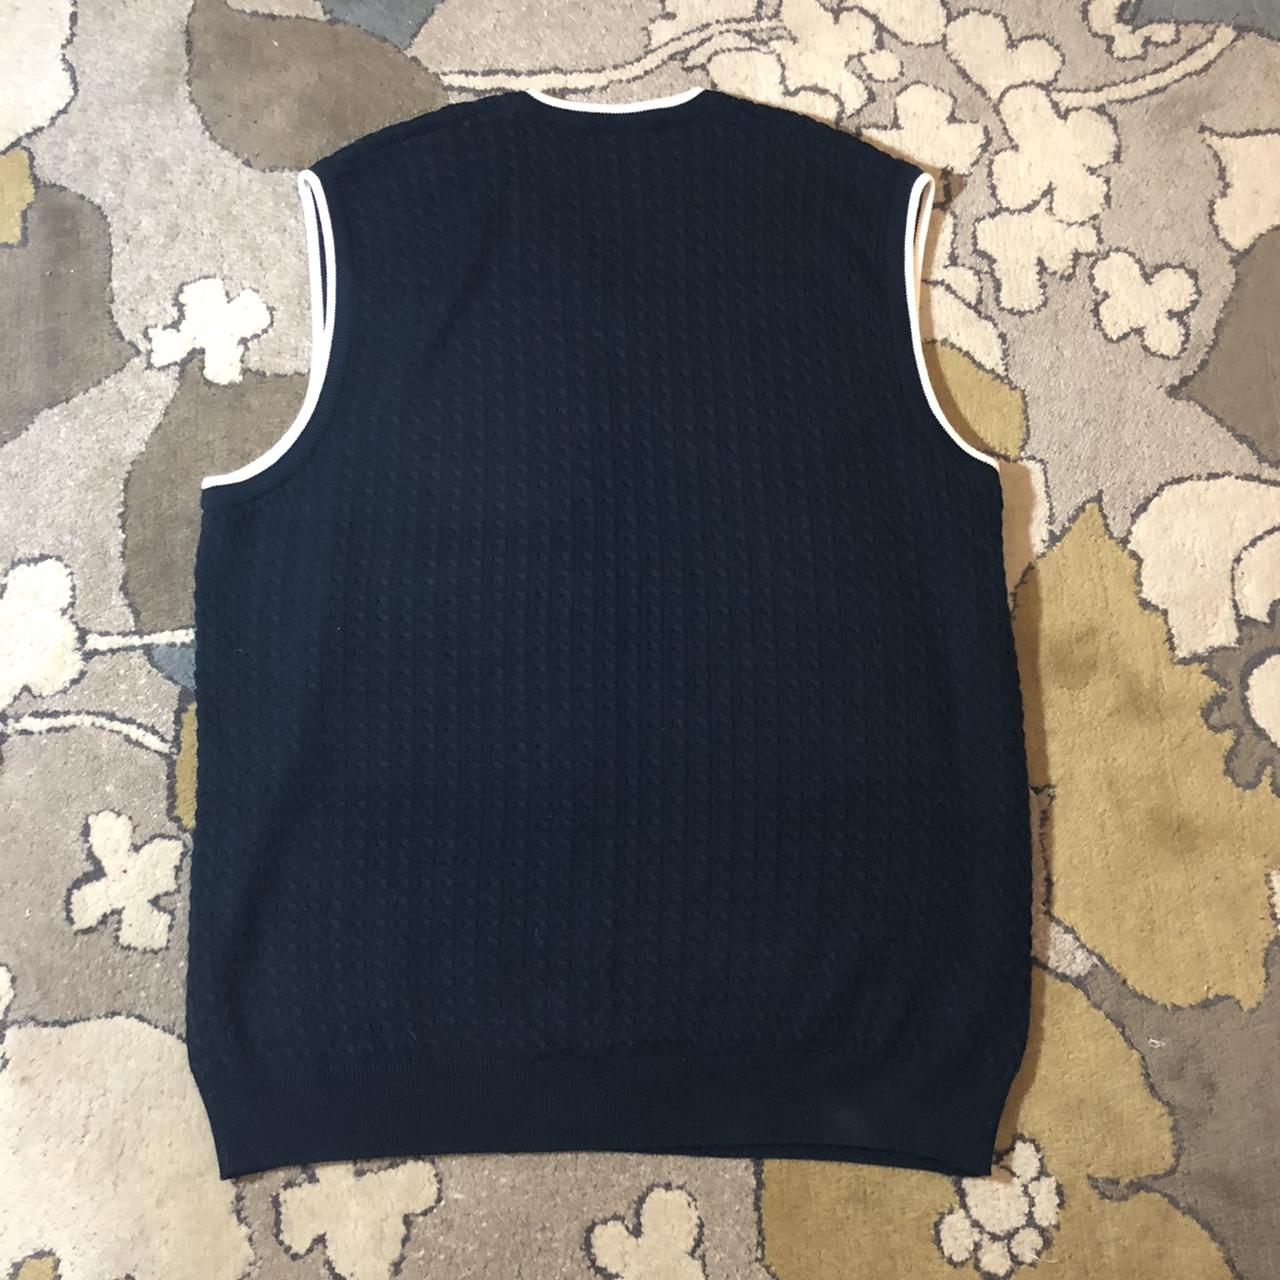 Cotton Traders sweater vest Great condition... - Depop